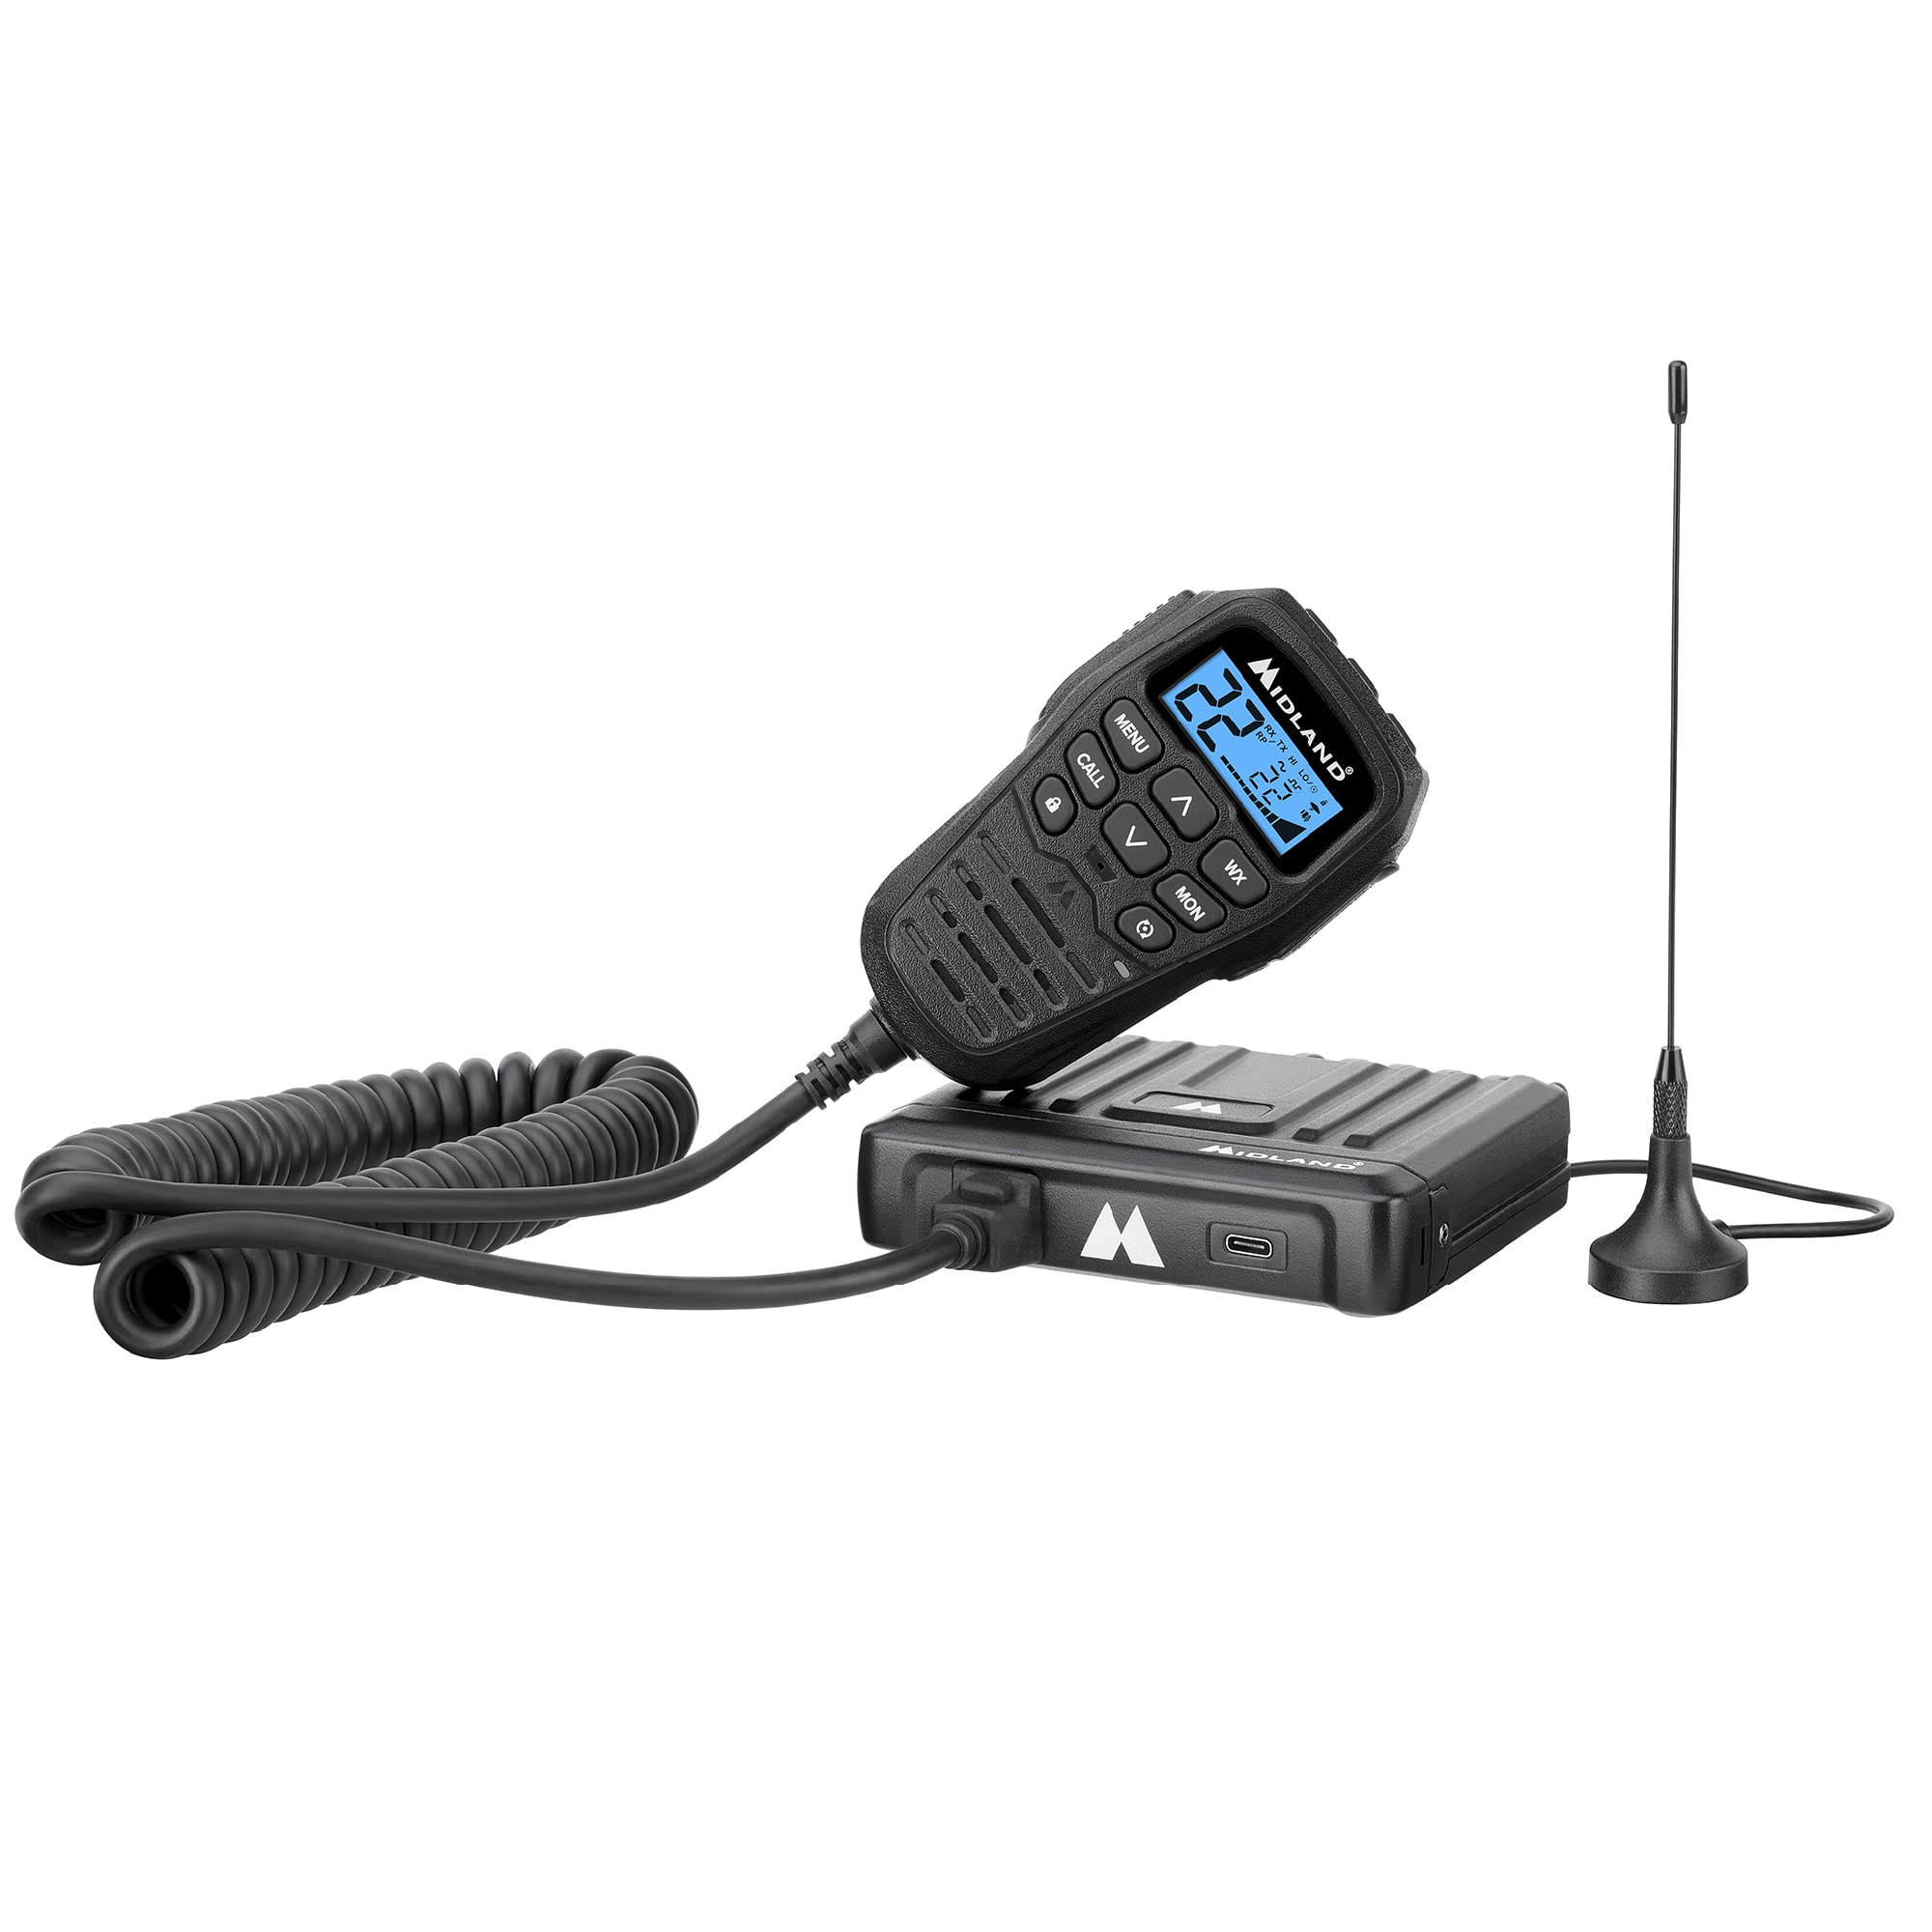 Midland – MXT275 MicroMobile GMRS Radio – 15 watts Two-Way Radio with Integrated Control Microphone – Overland Caravanning Tractors – Detachable External Magnetic Mount Antenna - 8 Repeater Channels